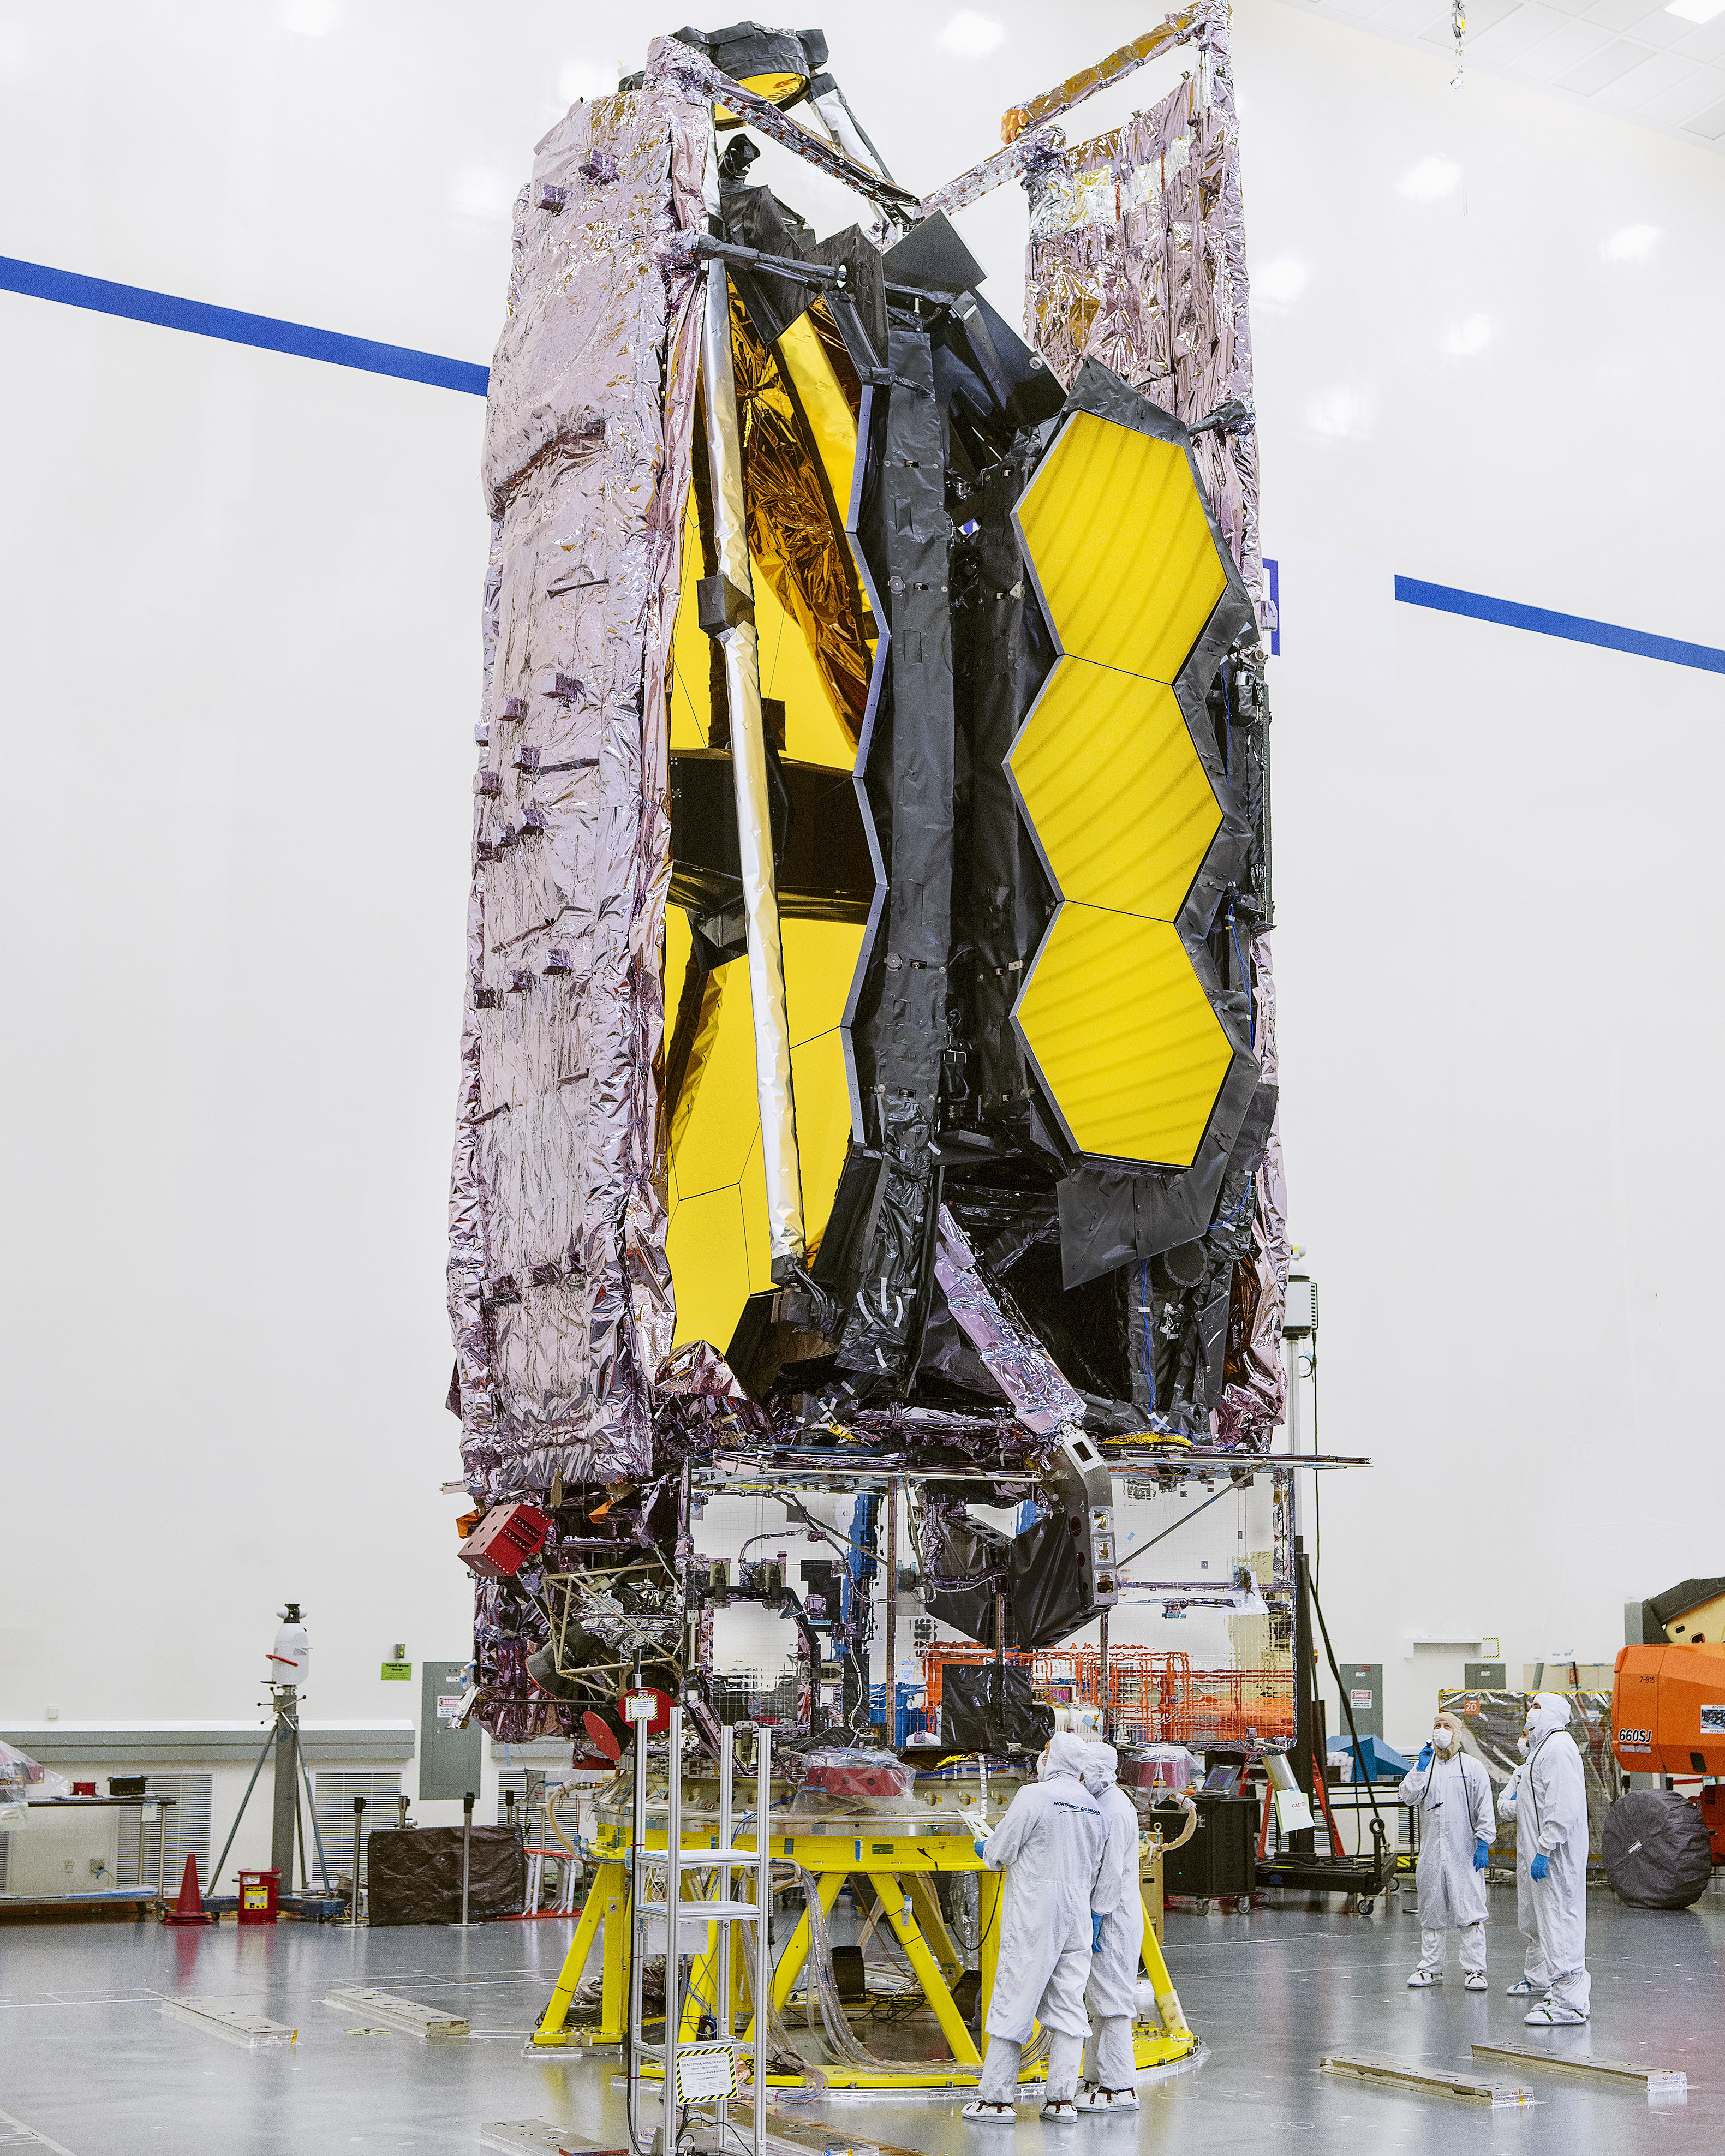 NASA’s James Webb Space Telescope being prepped for shipment to its launch site.